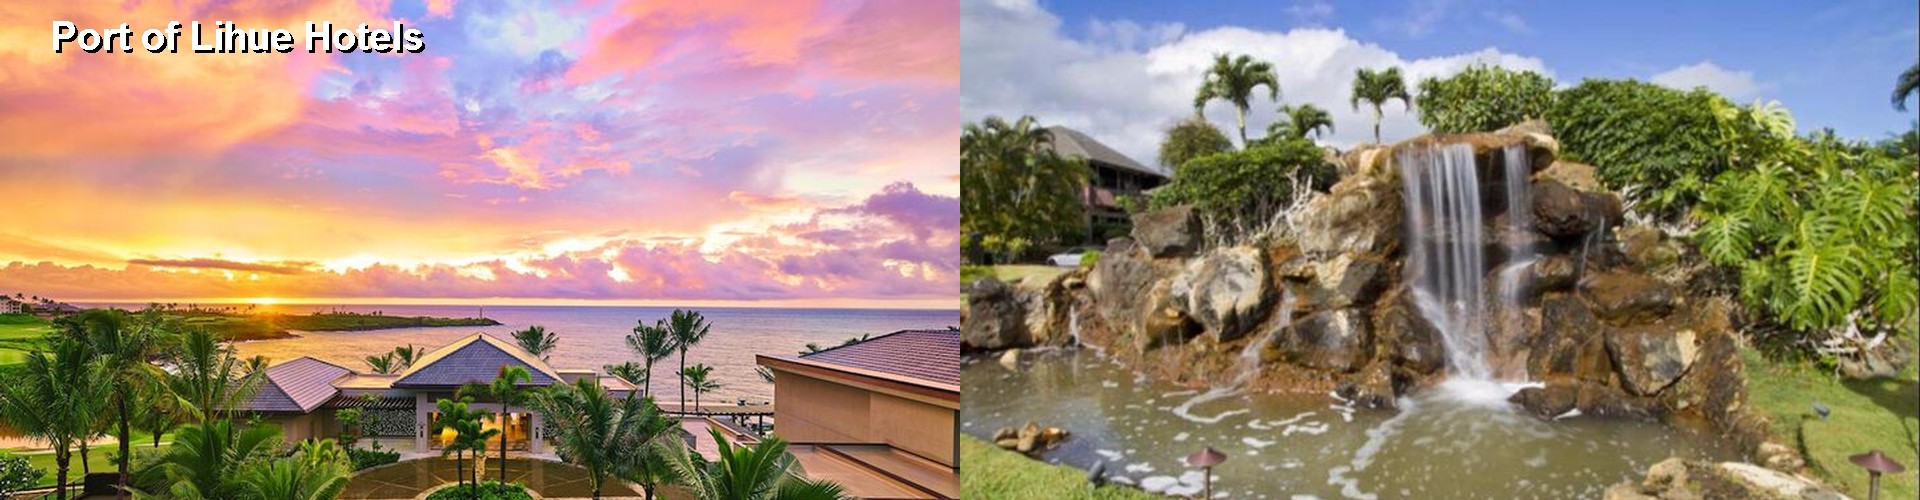 5 Best Hotels near Port of Lihue